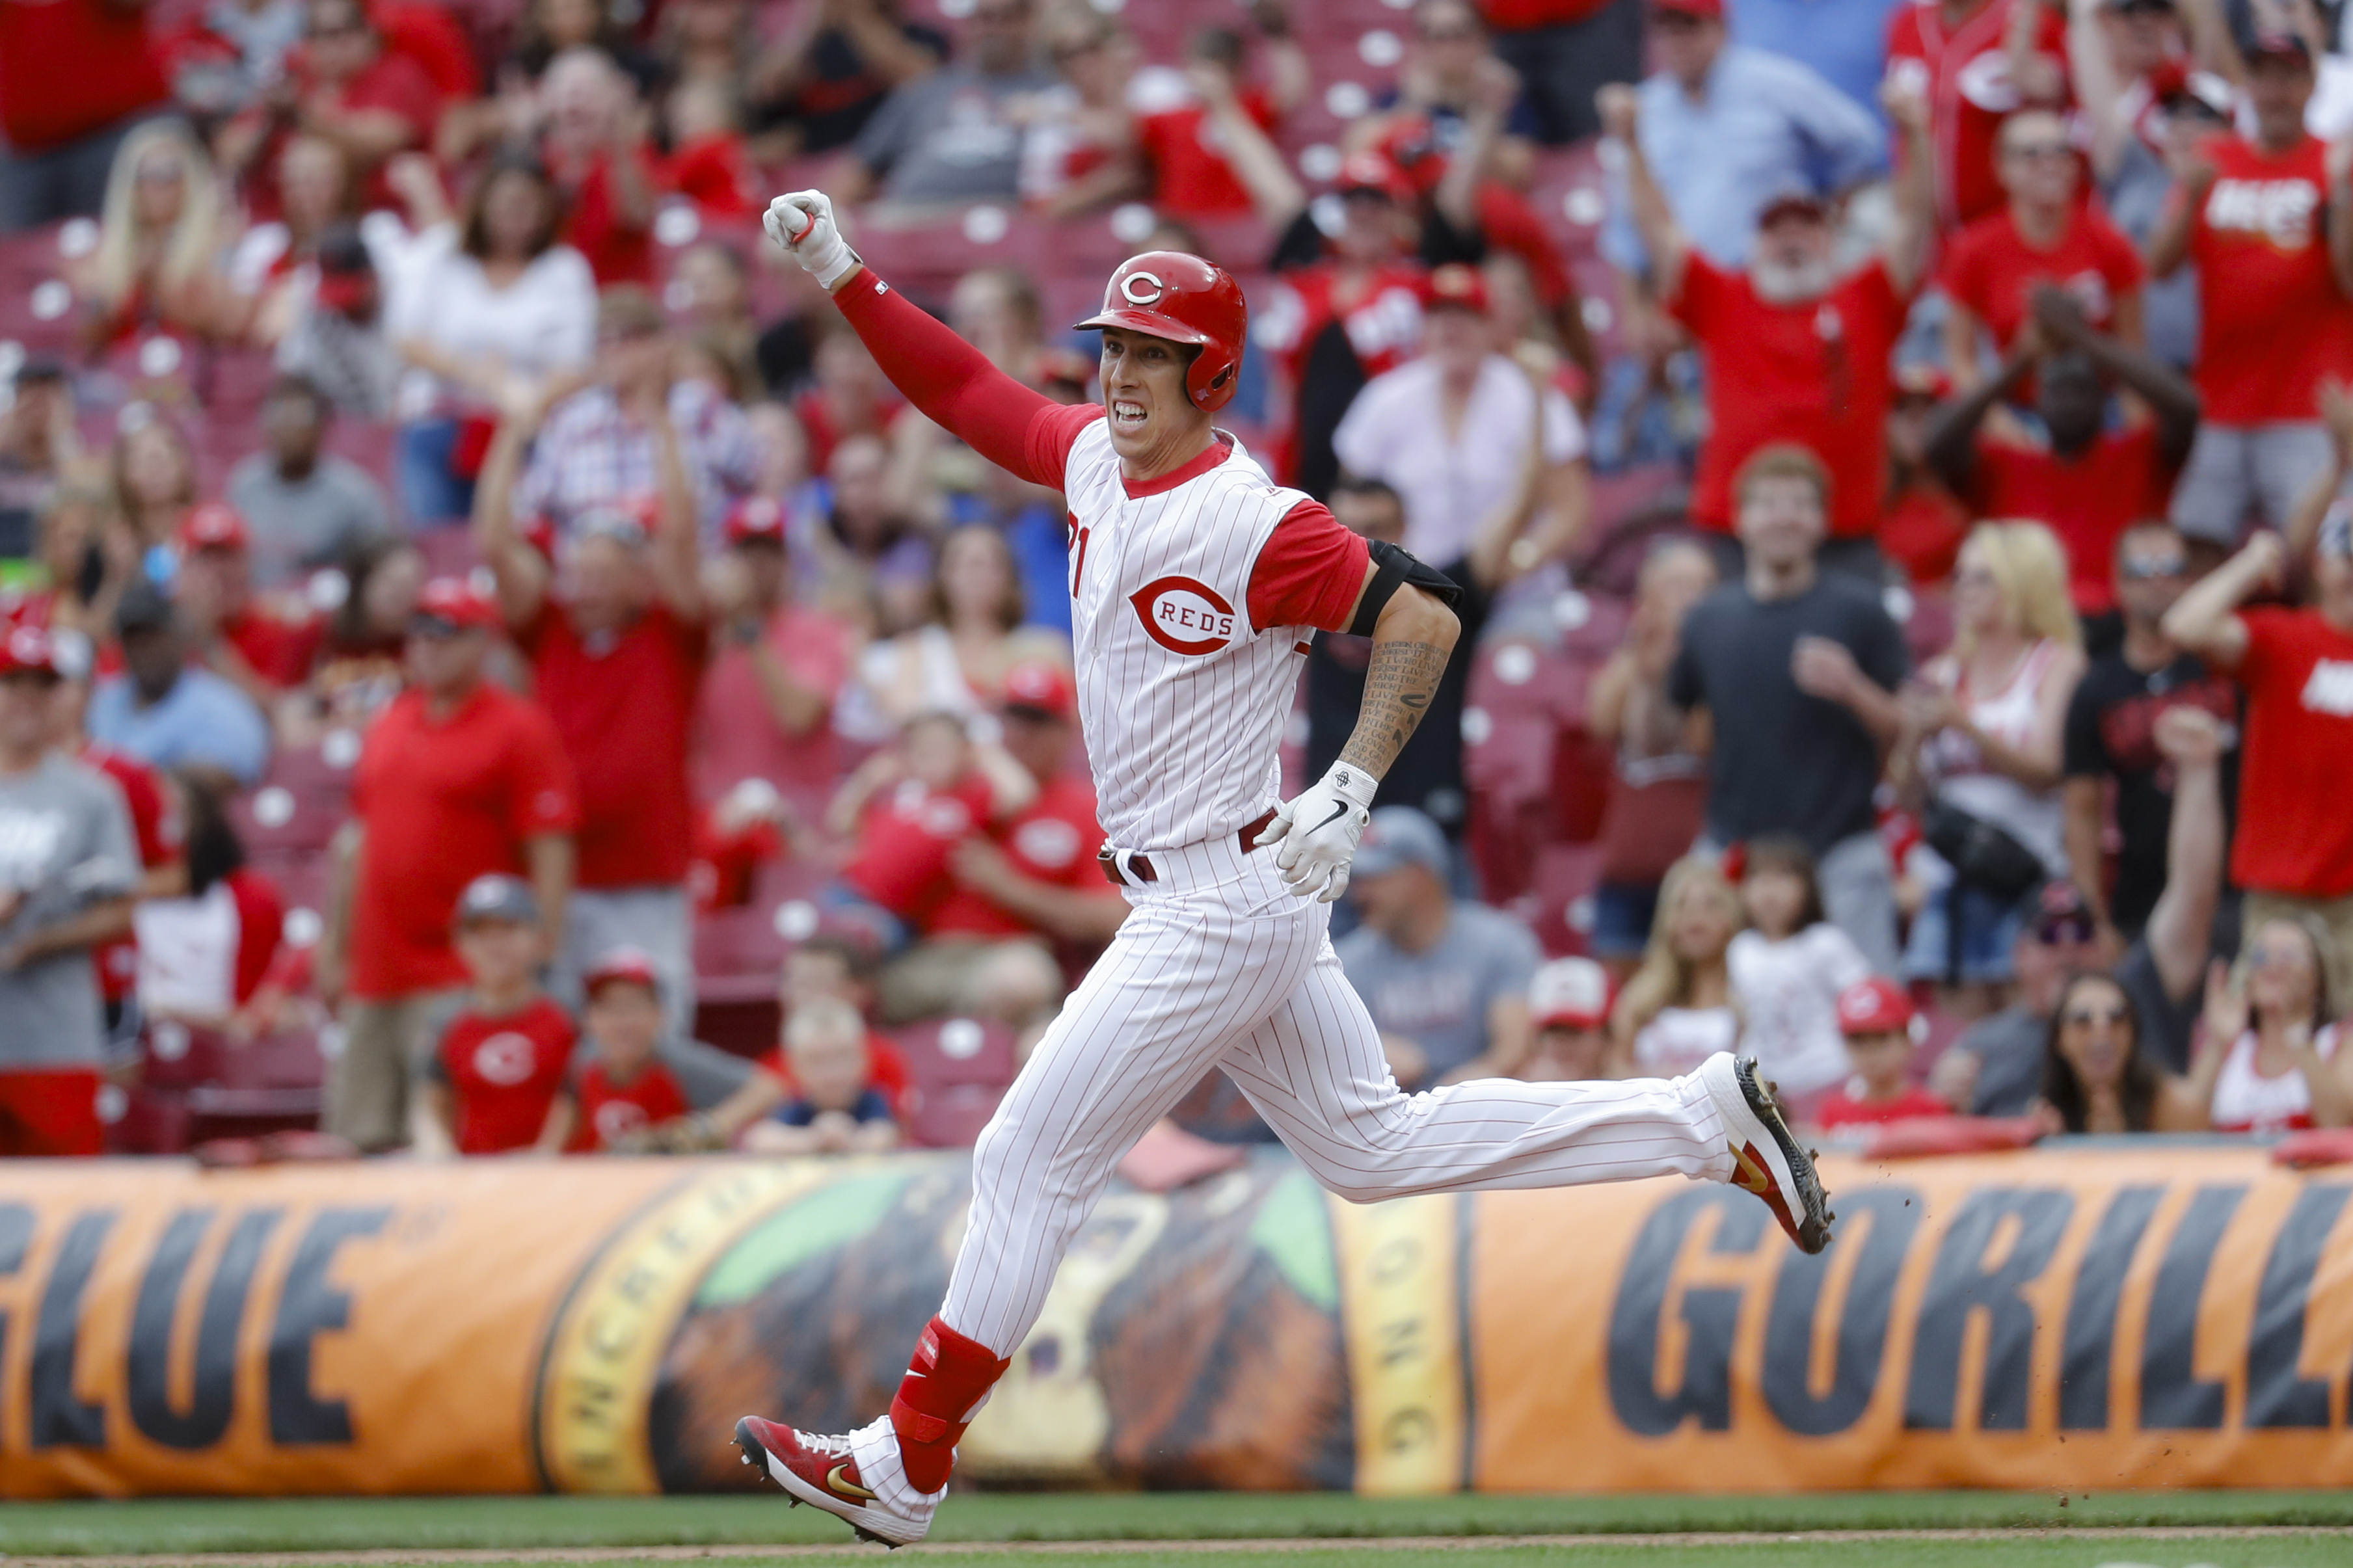 Lorenzen's 9th-inning pinch double lifts Reds over D-Backs